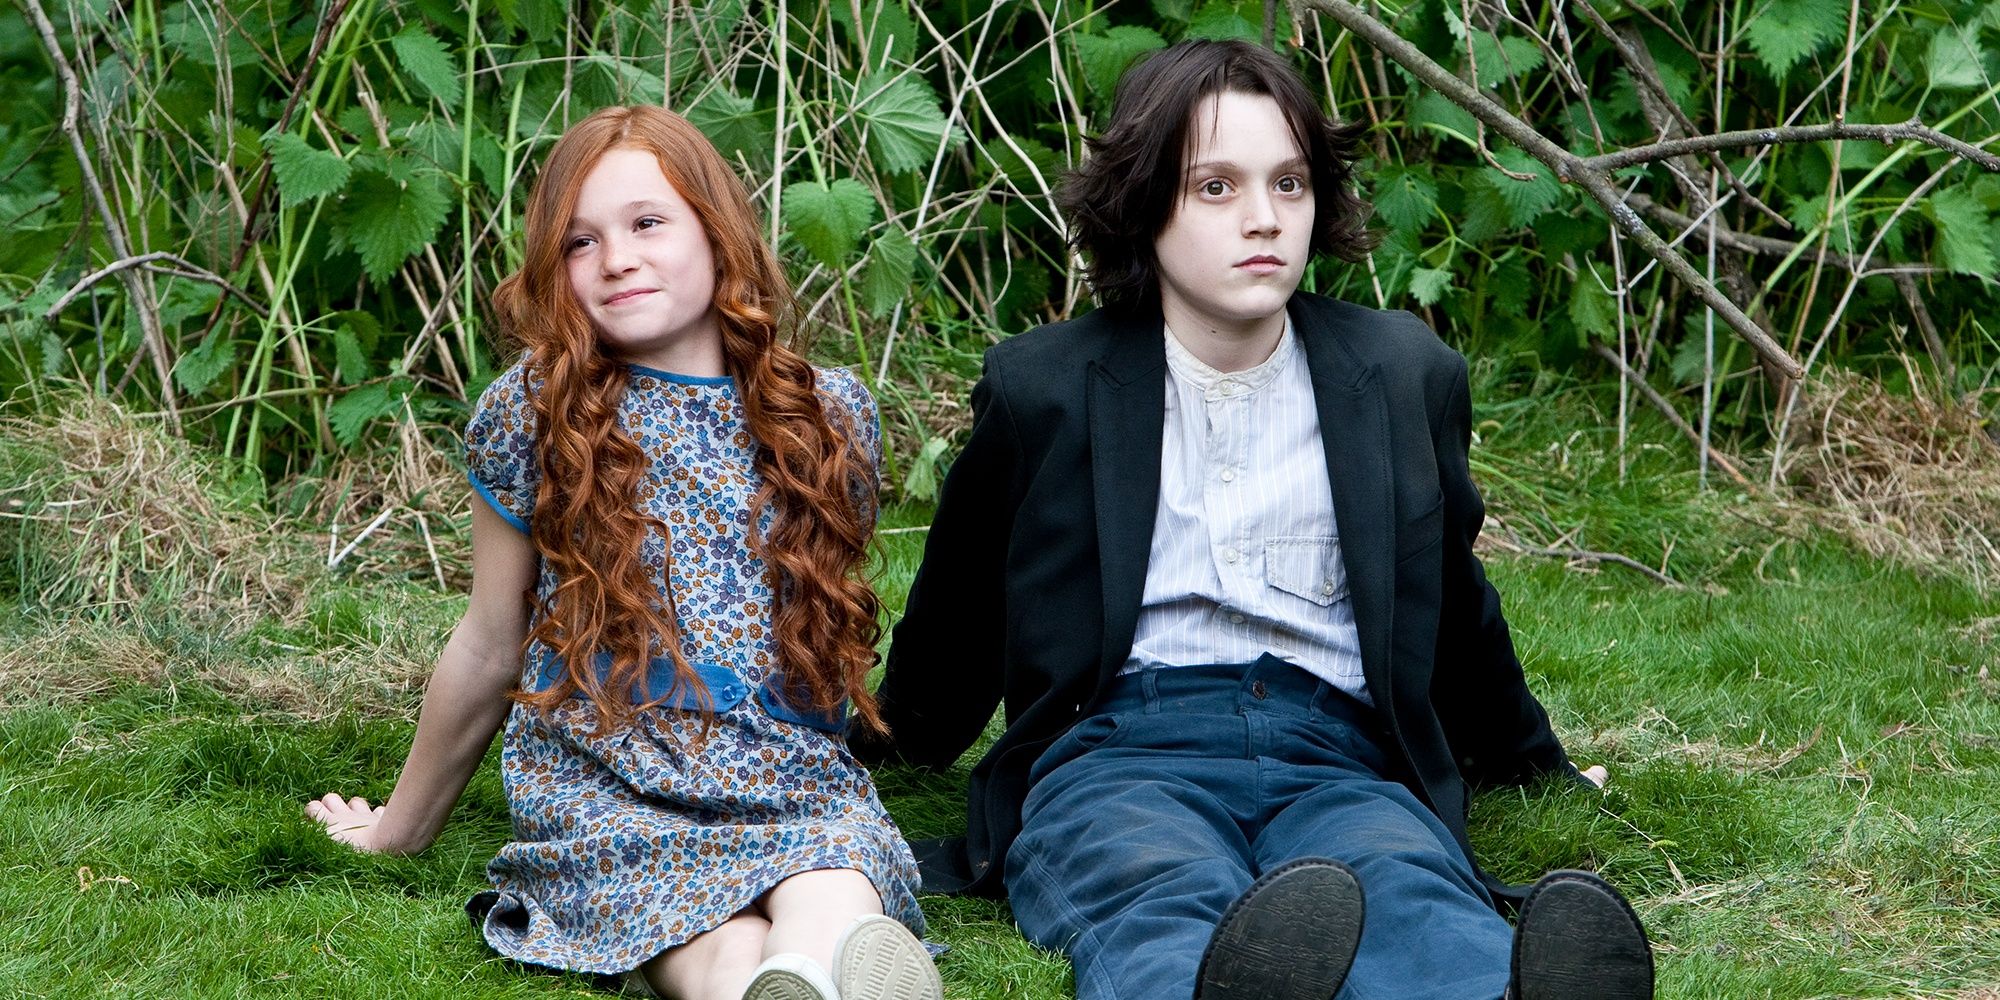 Severus Snape and Lily Potter in a field in Harry Potter and the Deathly Hallows - Part 2 